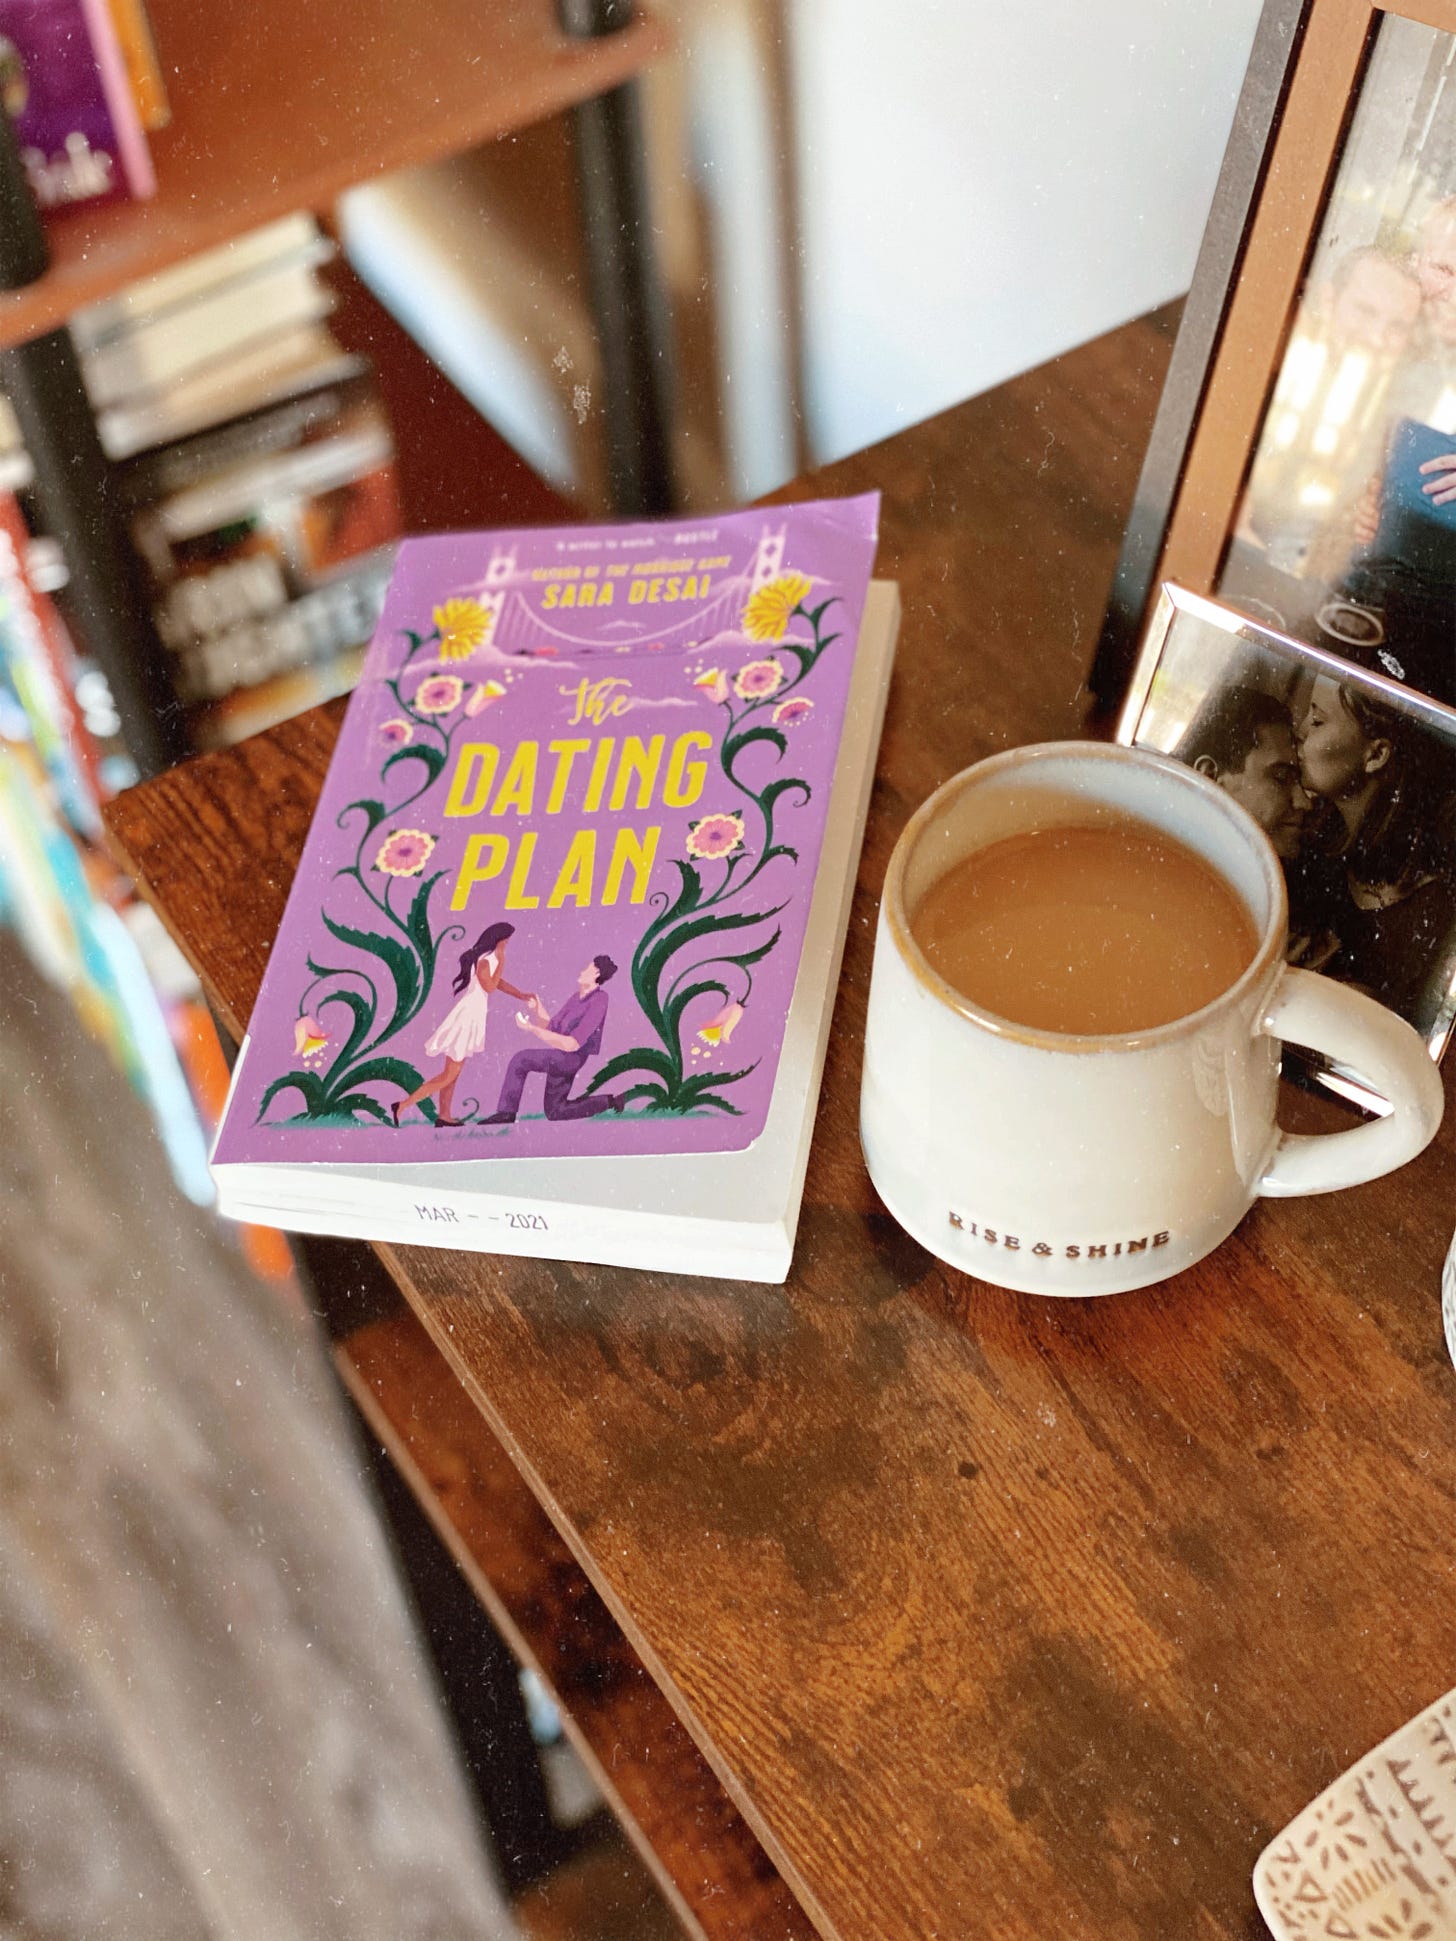 A photo of The Dating Plan sitting on a dark wood coffee table. A cup of coffee is set down to the right of the book. The book cover is a light purple, with yellow lettering.